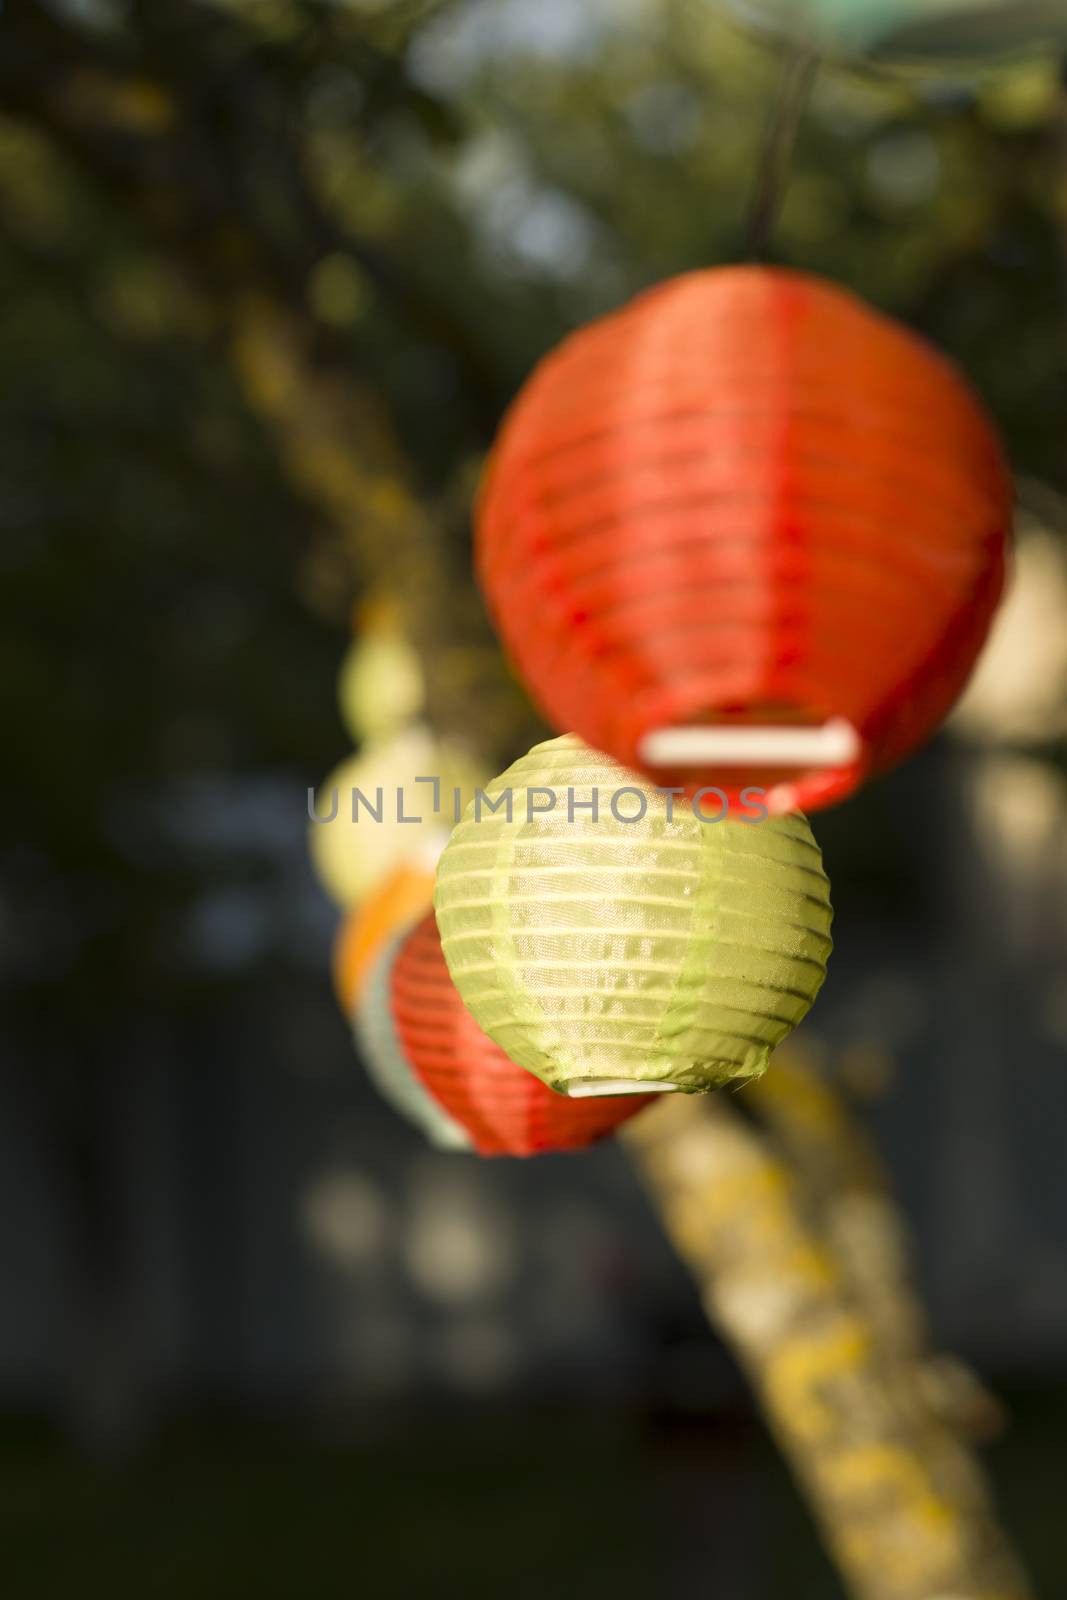 Lantern in the yard on the tree bokeh background, night and warm light, hanging lanterns, natural light, evening time.